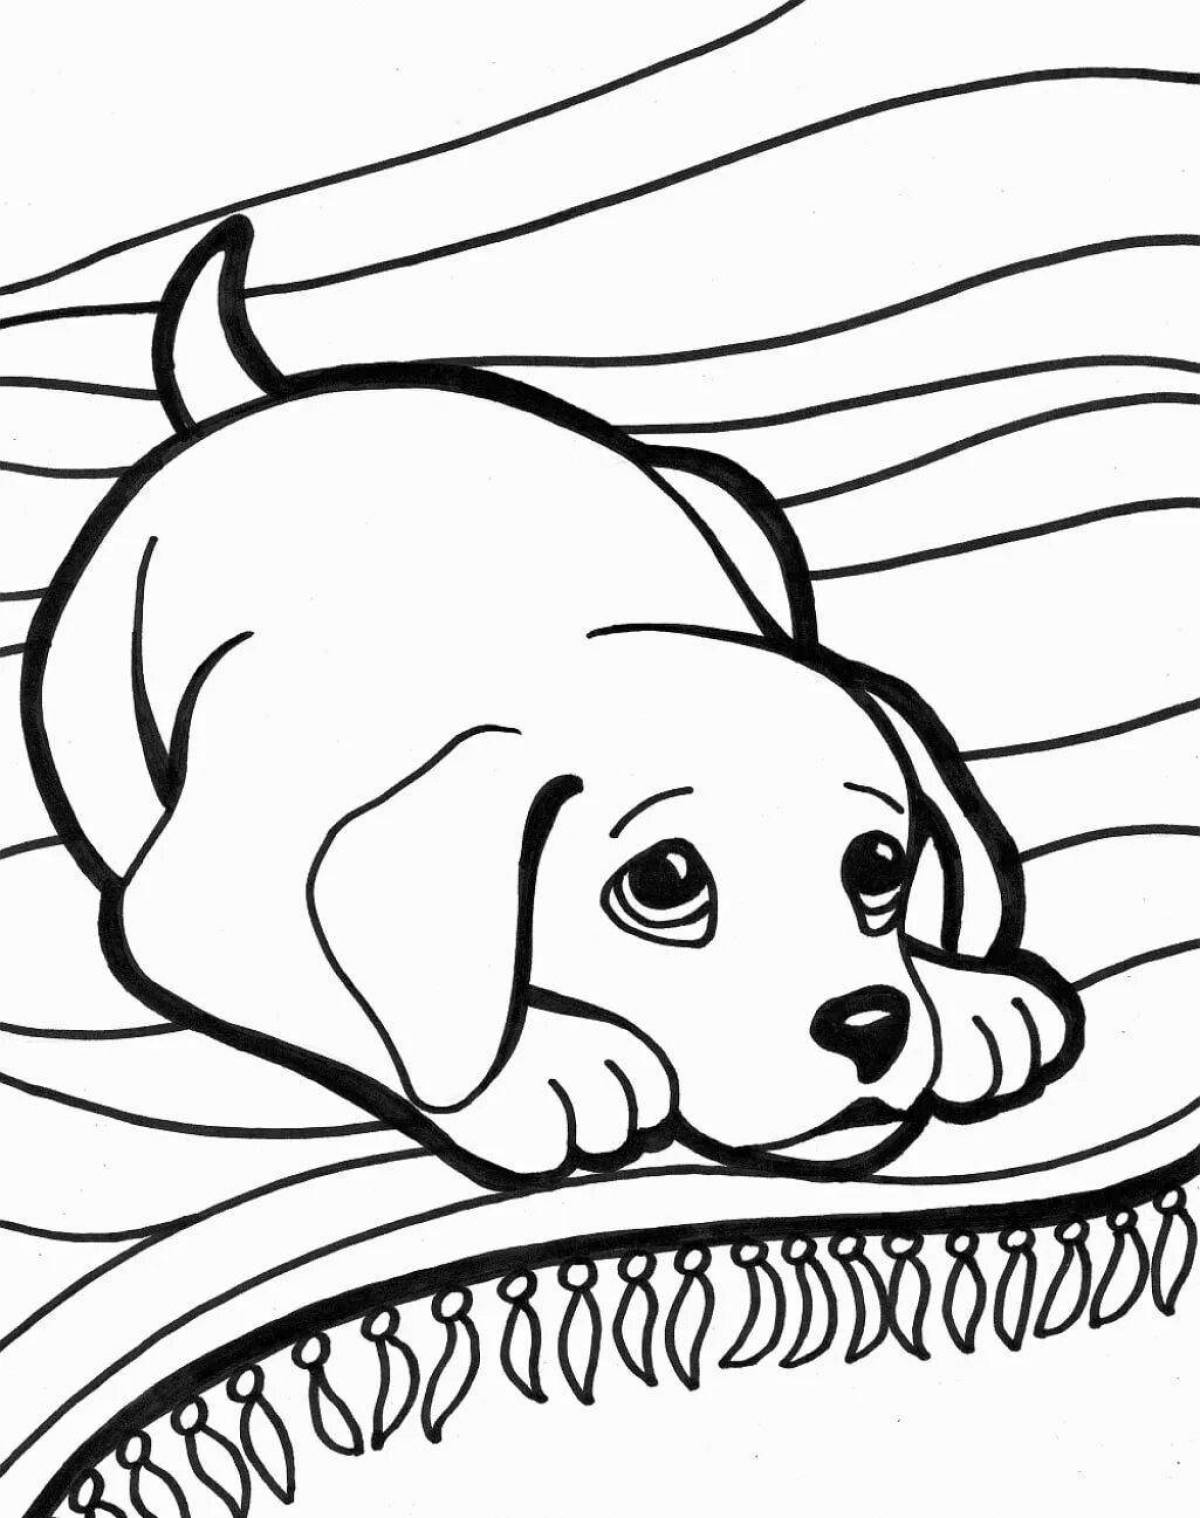 Fun coloring book for girls with 9 year old animals